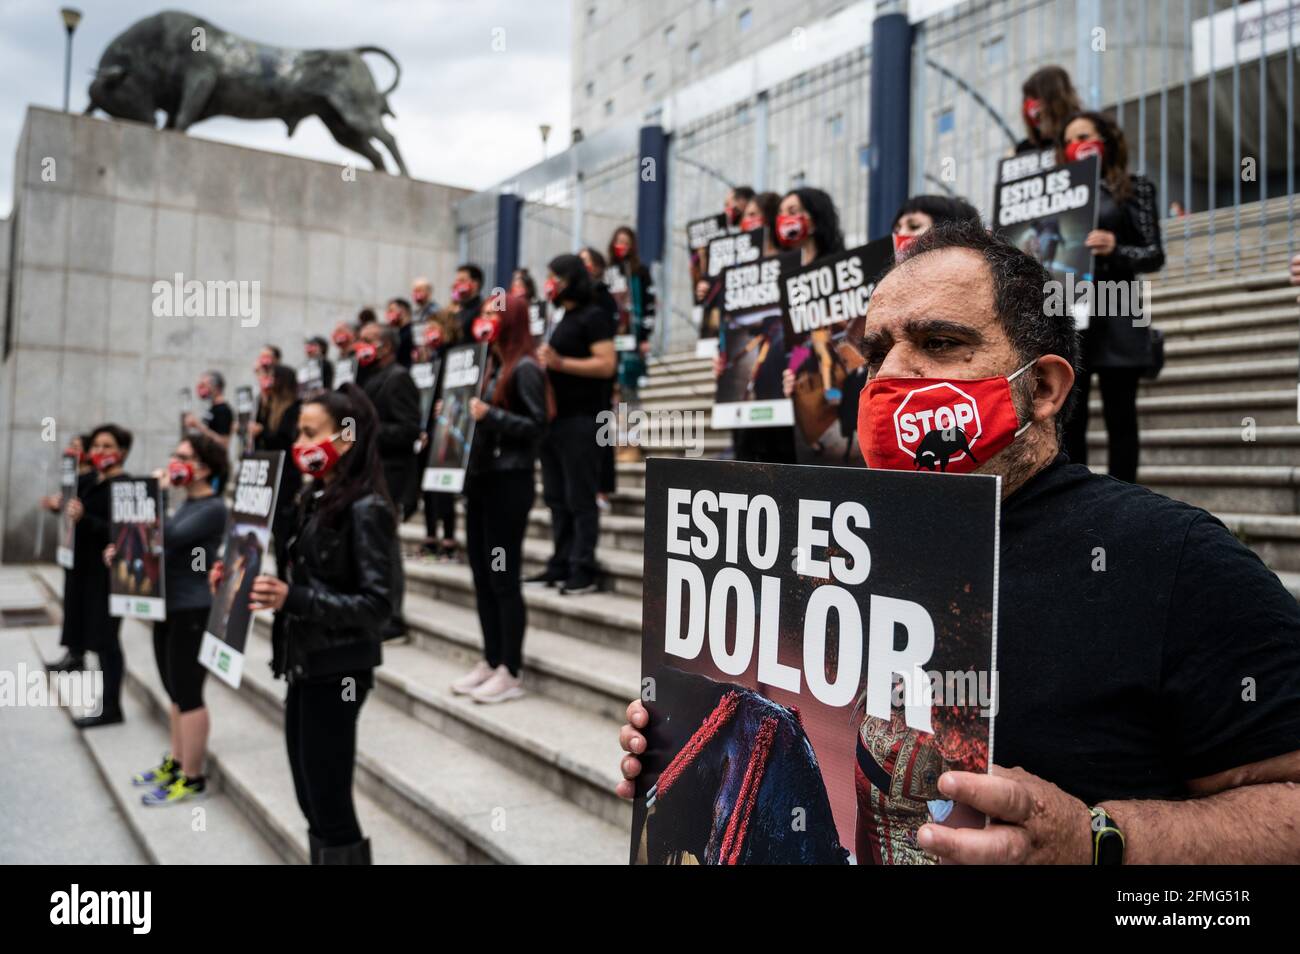 Animal rights activists carrying placards with bullfighting scenes during a protest against bullfighting as the bullfighting season starts in Madrid next week for San Isidro festivity. Animal rights group Anima Naturalis gathered to protest in Vista Alegre bullring of Madrid demanding the abolition of bullfighting, shouting slogans against animal cruelty and animal torture. The Bullfighting season will start next week with a maximum capacity of 40% and a maximum of 6,000 spectators due to healthcare measures to stop the spread of coronavirus. Stock Photo